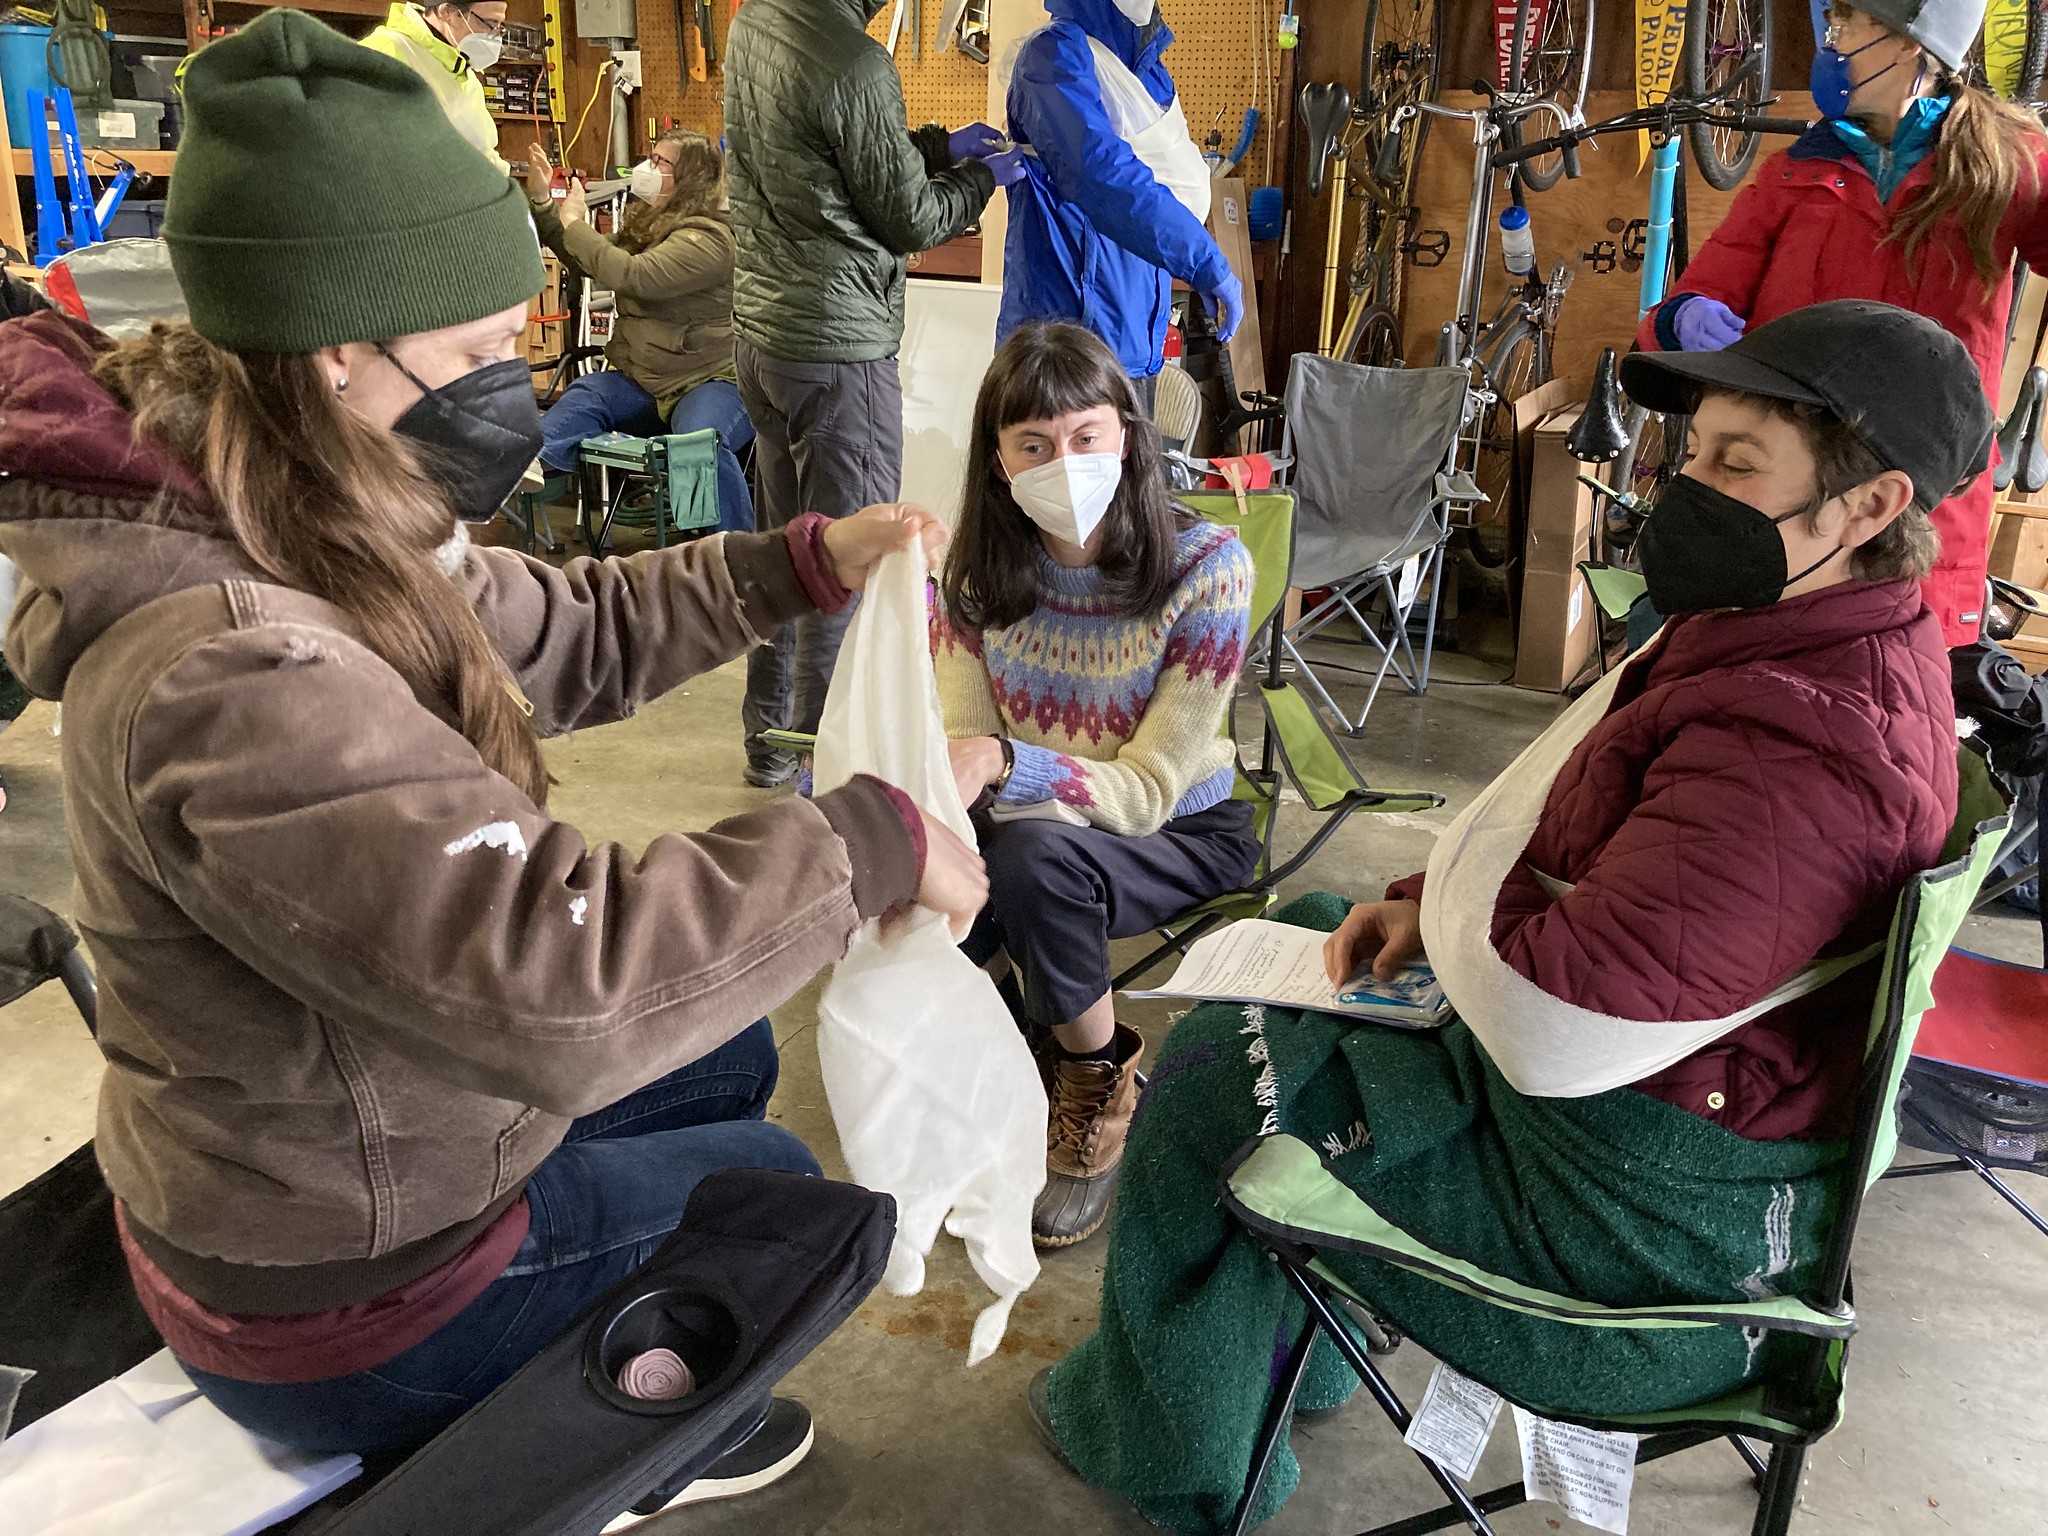 This image shows Daniela, a volunteer, and a member of the Rose Hips Forest Aid group demonstrating how to apply a sling for a hurt arm. This group is gathered at an indoor garage setting.